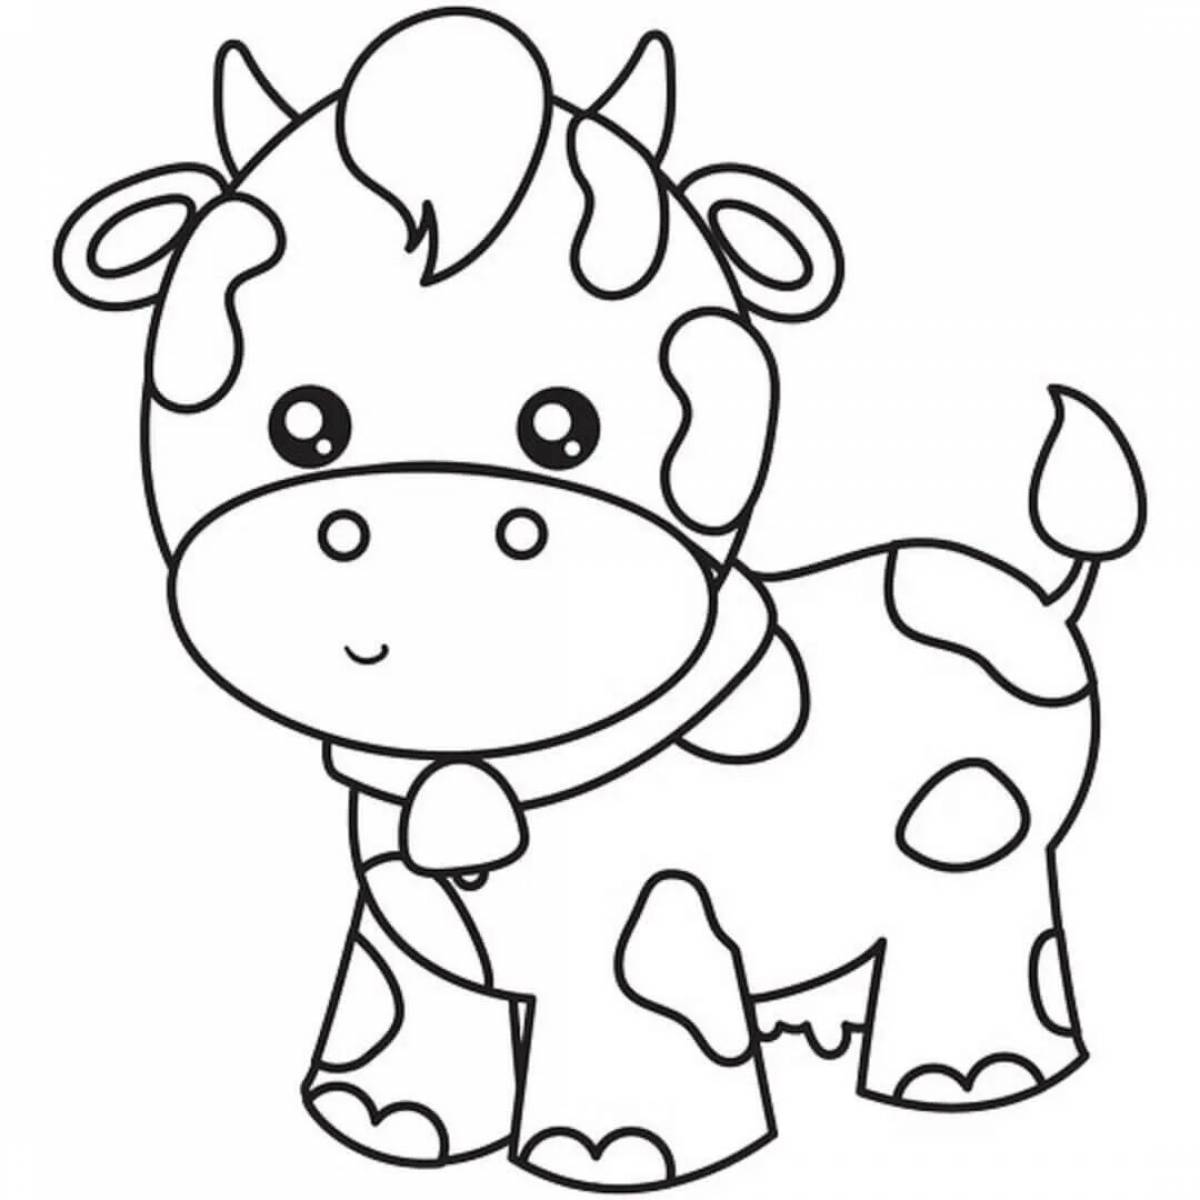 Dazzling cow coloring book for toddlers 2 3 years old